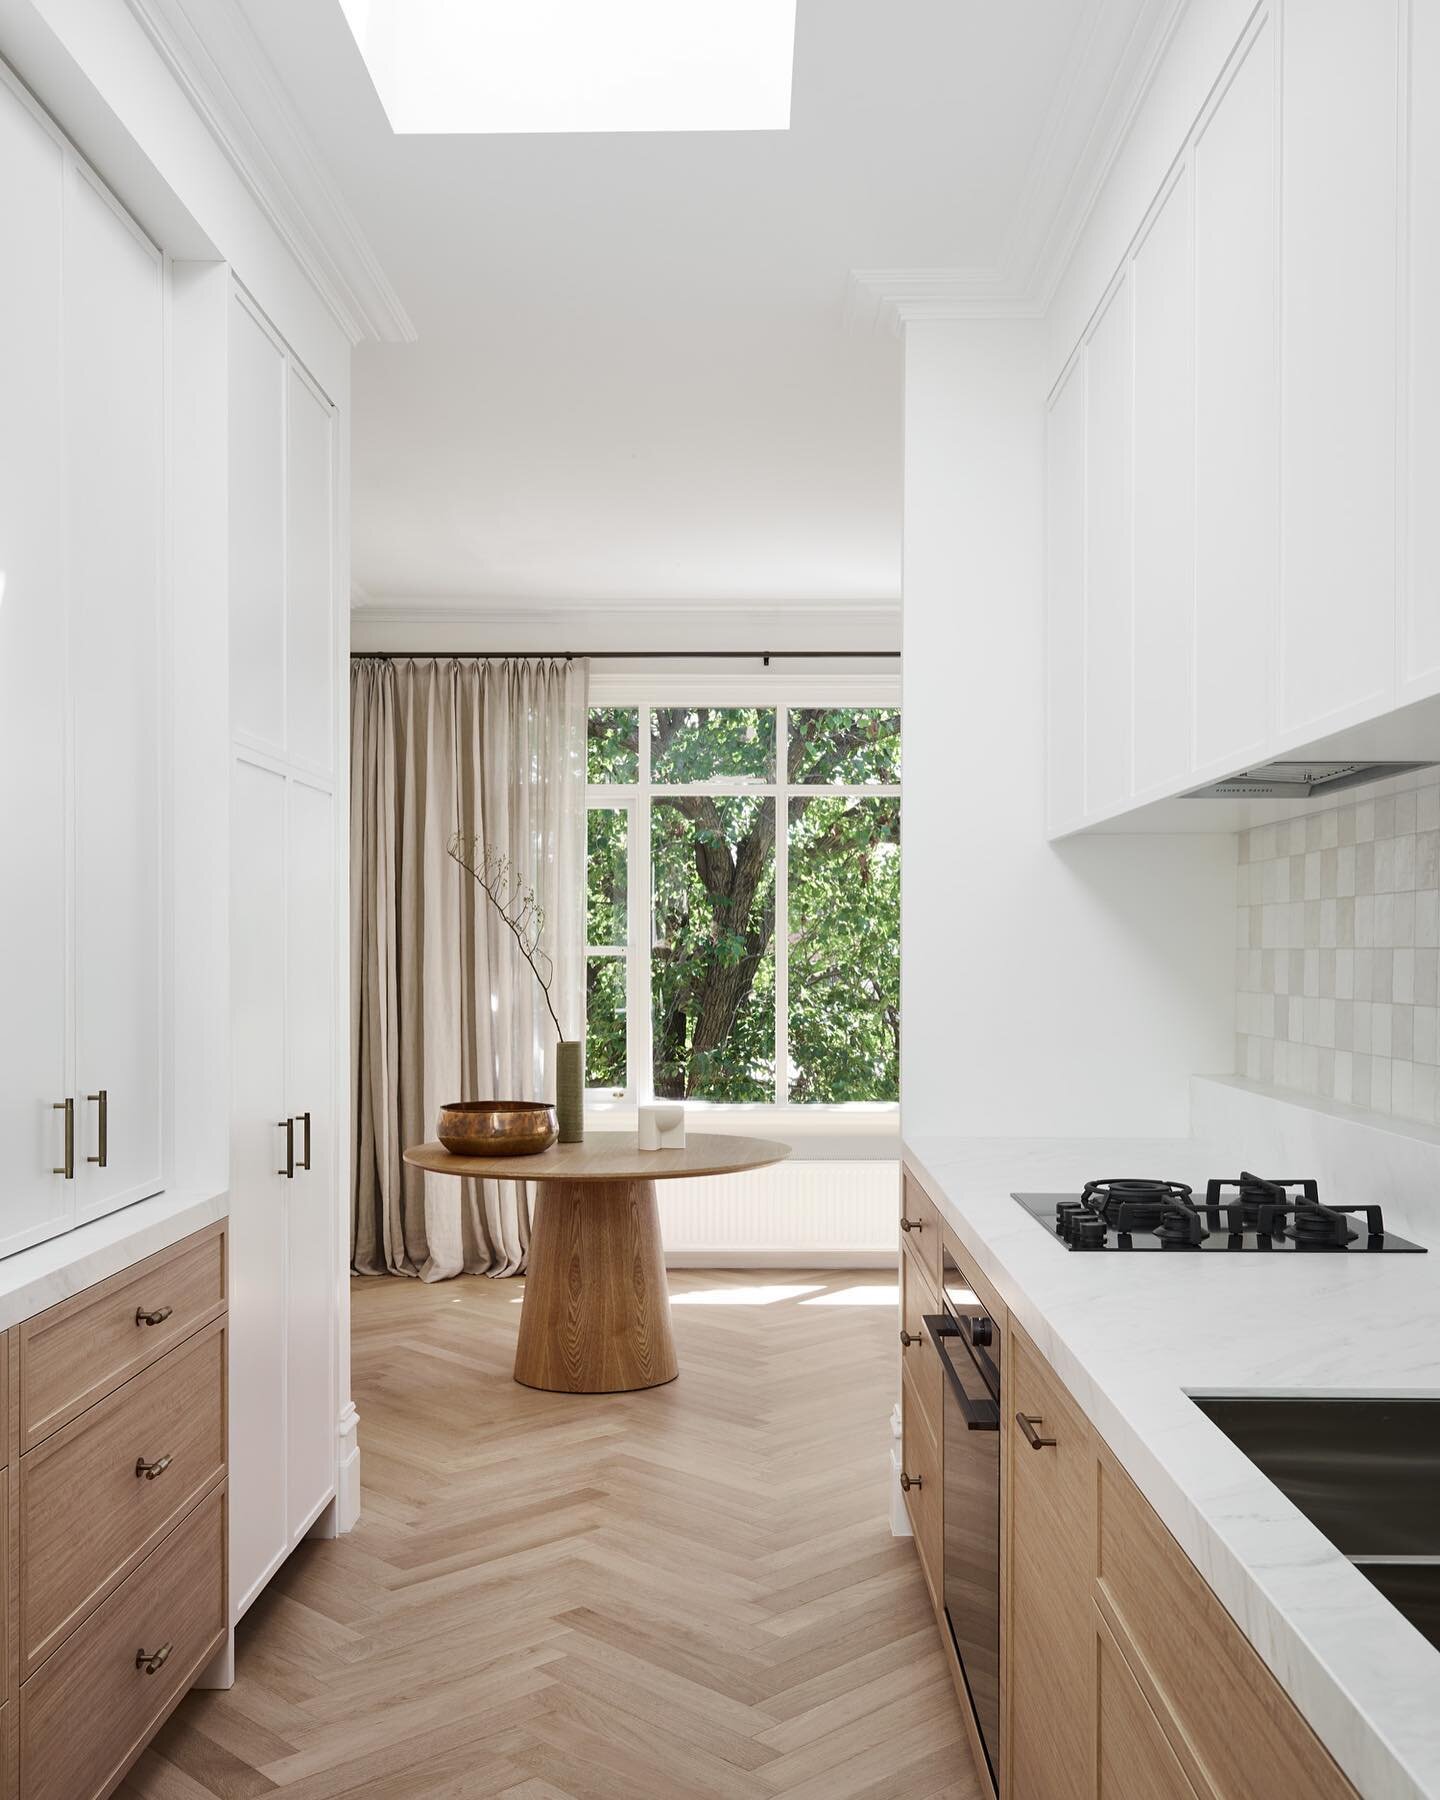 Daydreaming about our #BremenCottage kitchen.

The combination of herringbone floors, warm whites and a modern thin shaker profile creates a calm, fresh space that anyone would be happy to cook in. 

#onewolfdesign #melbournedesign #thelocalproject #